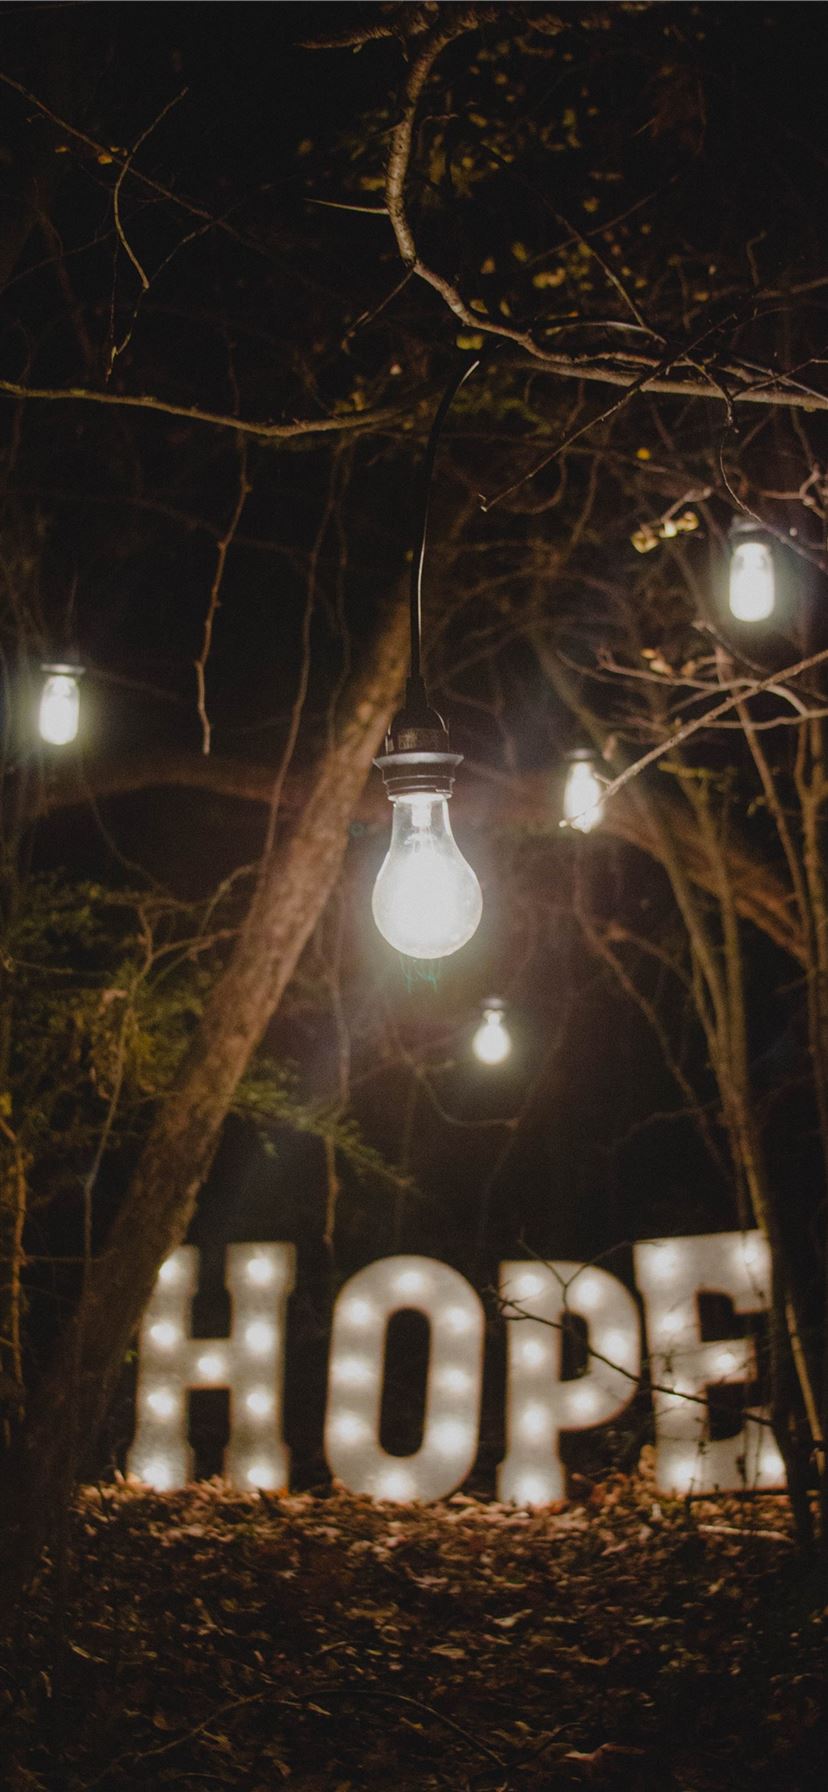 hope marquee signage surrounded by trees iPhone 11 wallpaper 